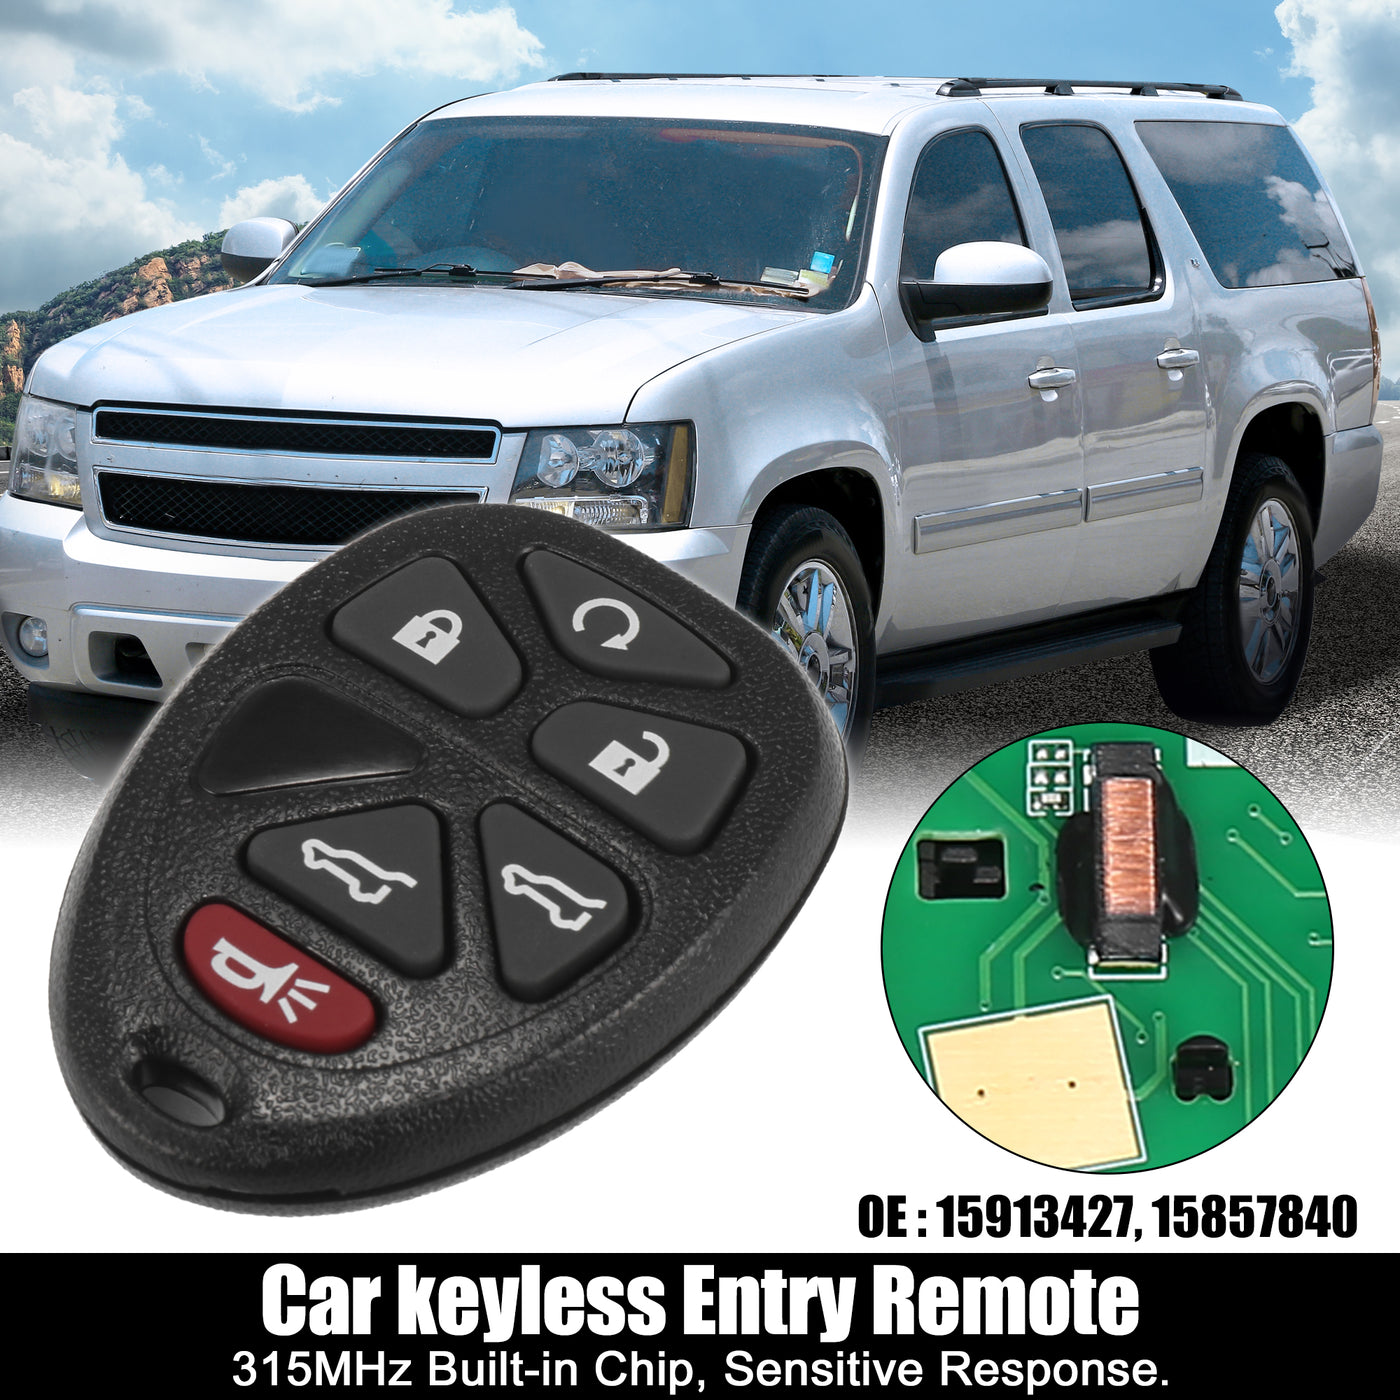 X AUTOHAUX 315MHz OUC60270 15913427 Replacement Keyless Entry Remote Car Key Fob for Chevrolet Suburban for Chevy Tahoe for GMC Yukon for for Cadillac Escalade 2007-2013 6 Buttons